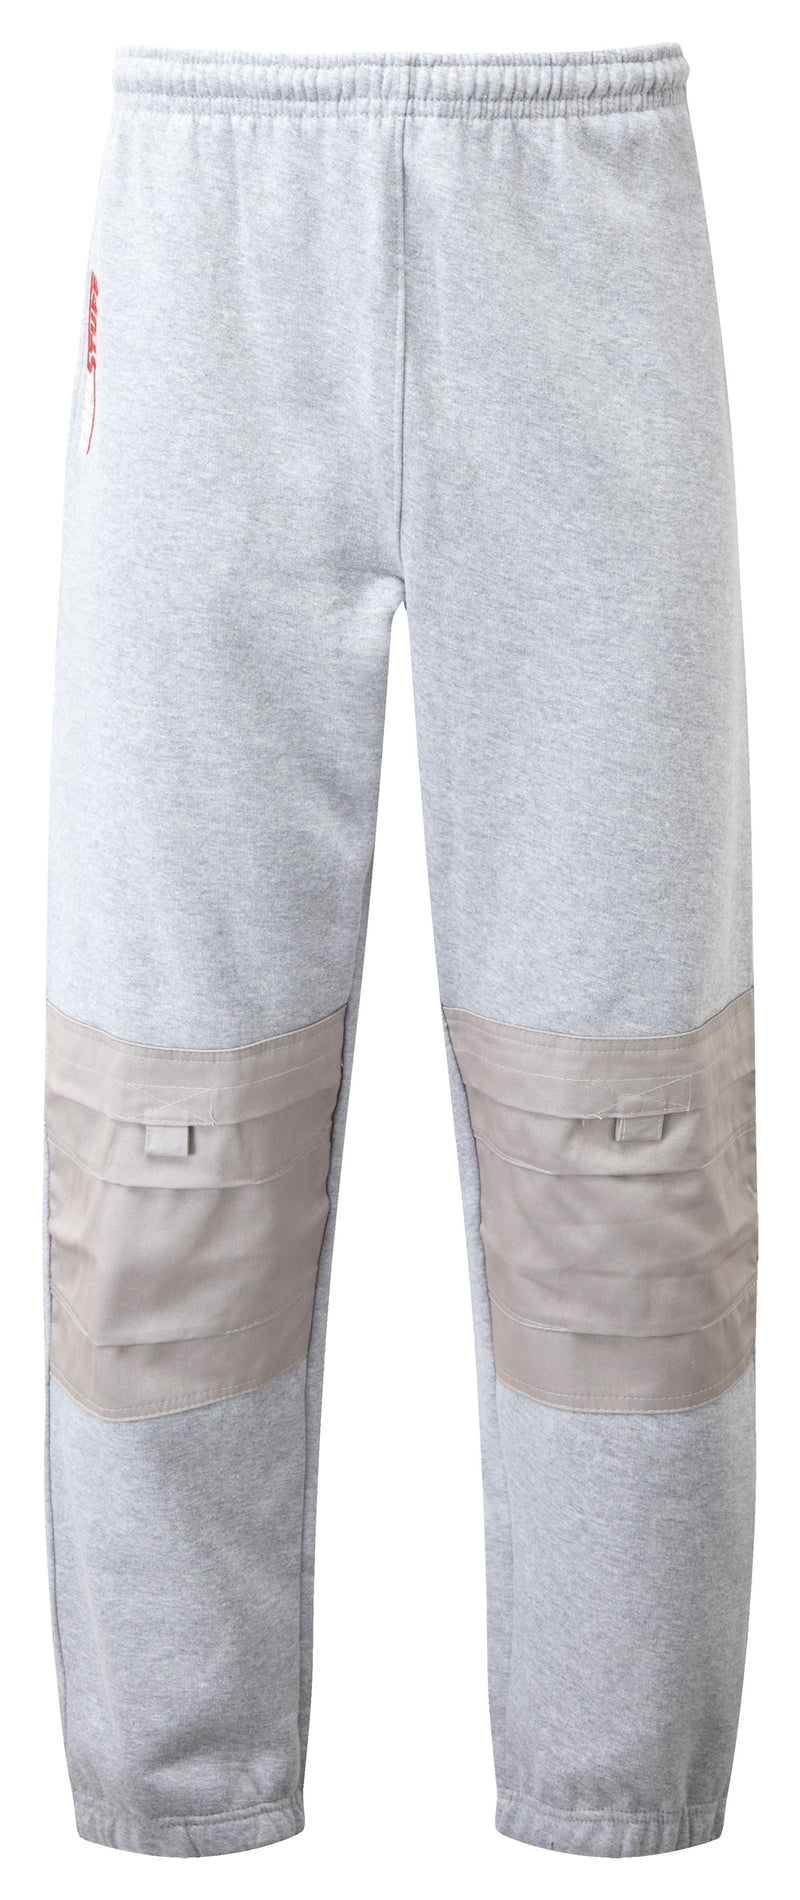 Grey Work joggers with knee Pads